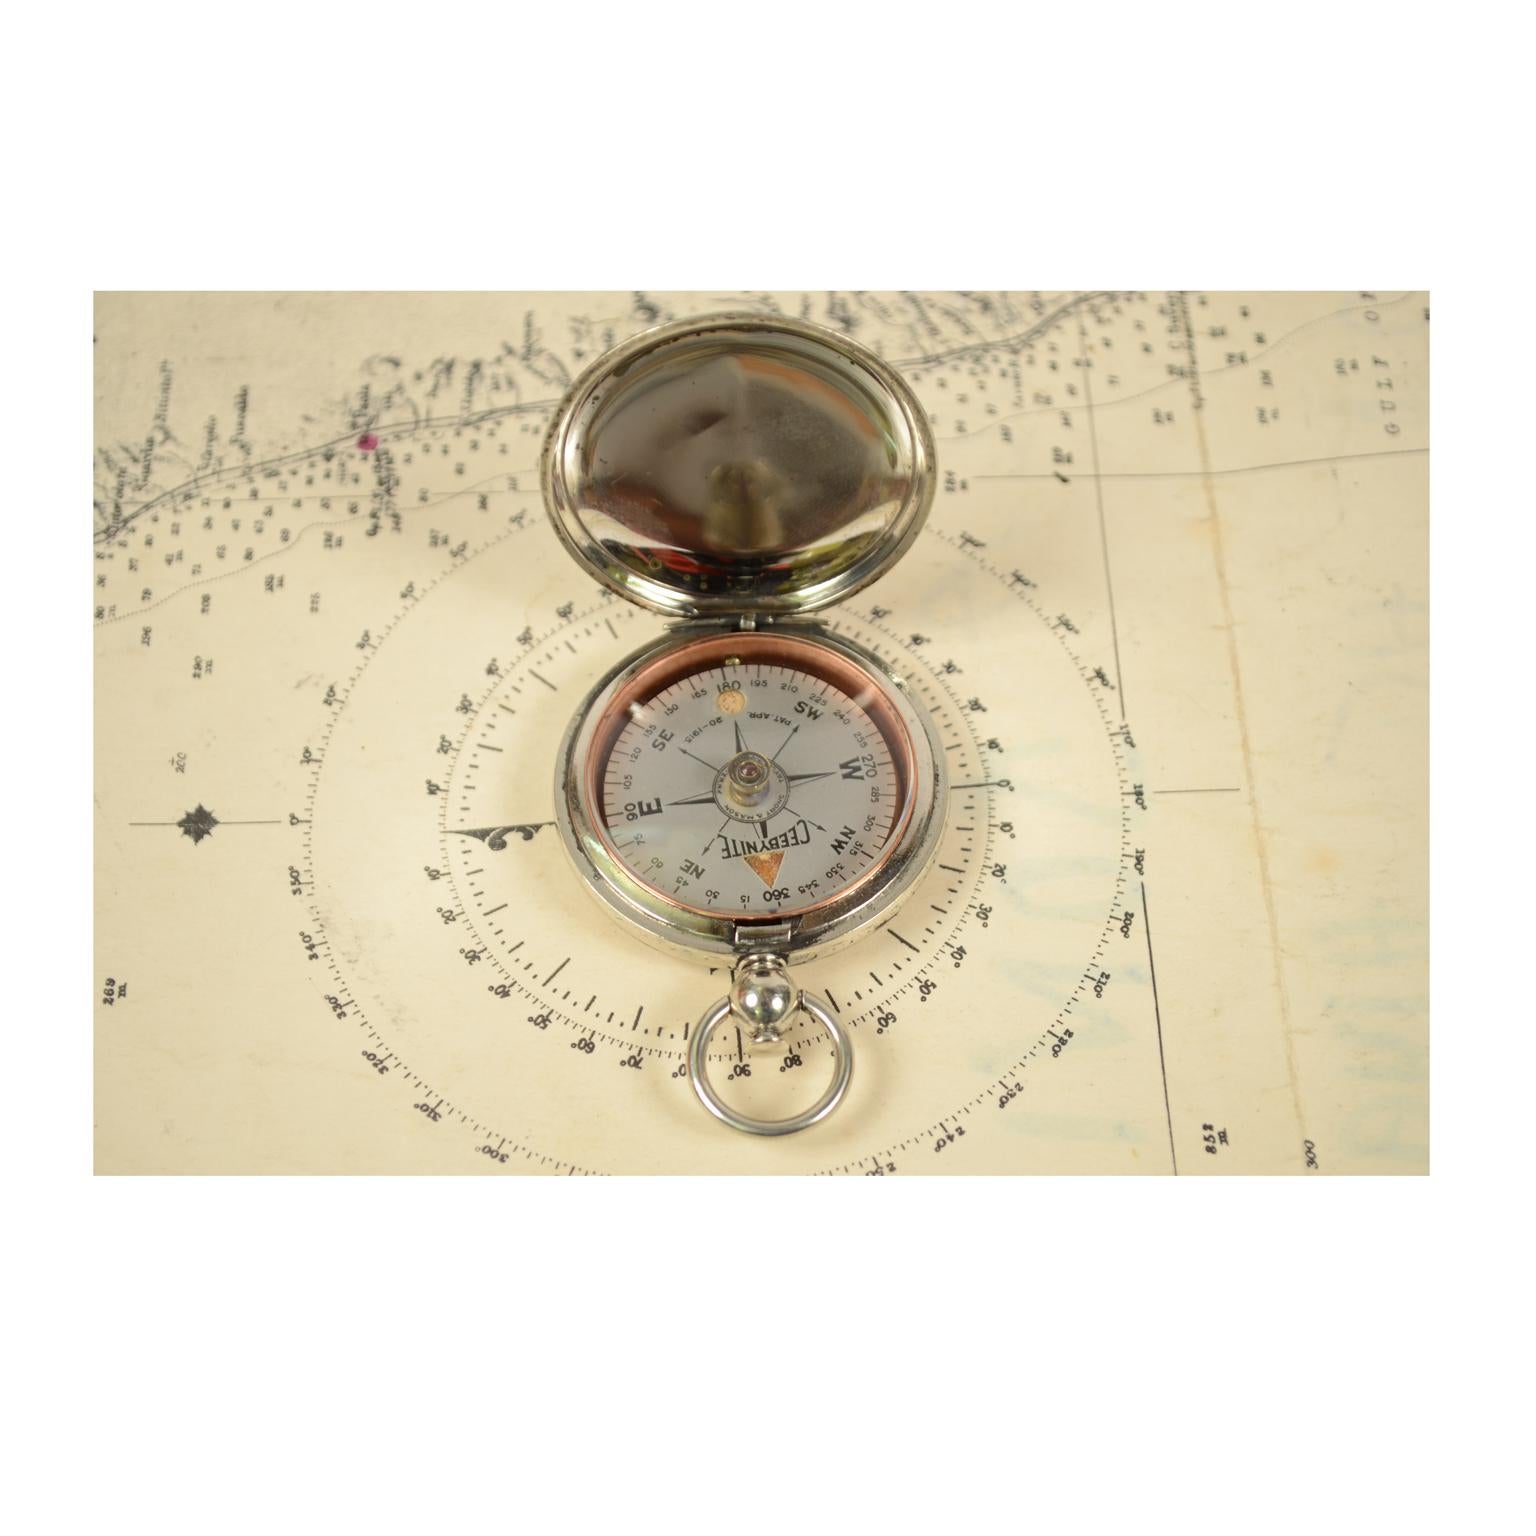 Early 20th Century Brass Pocket Compass Used by American Aviation Officers, 1915